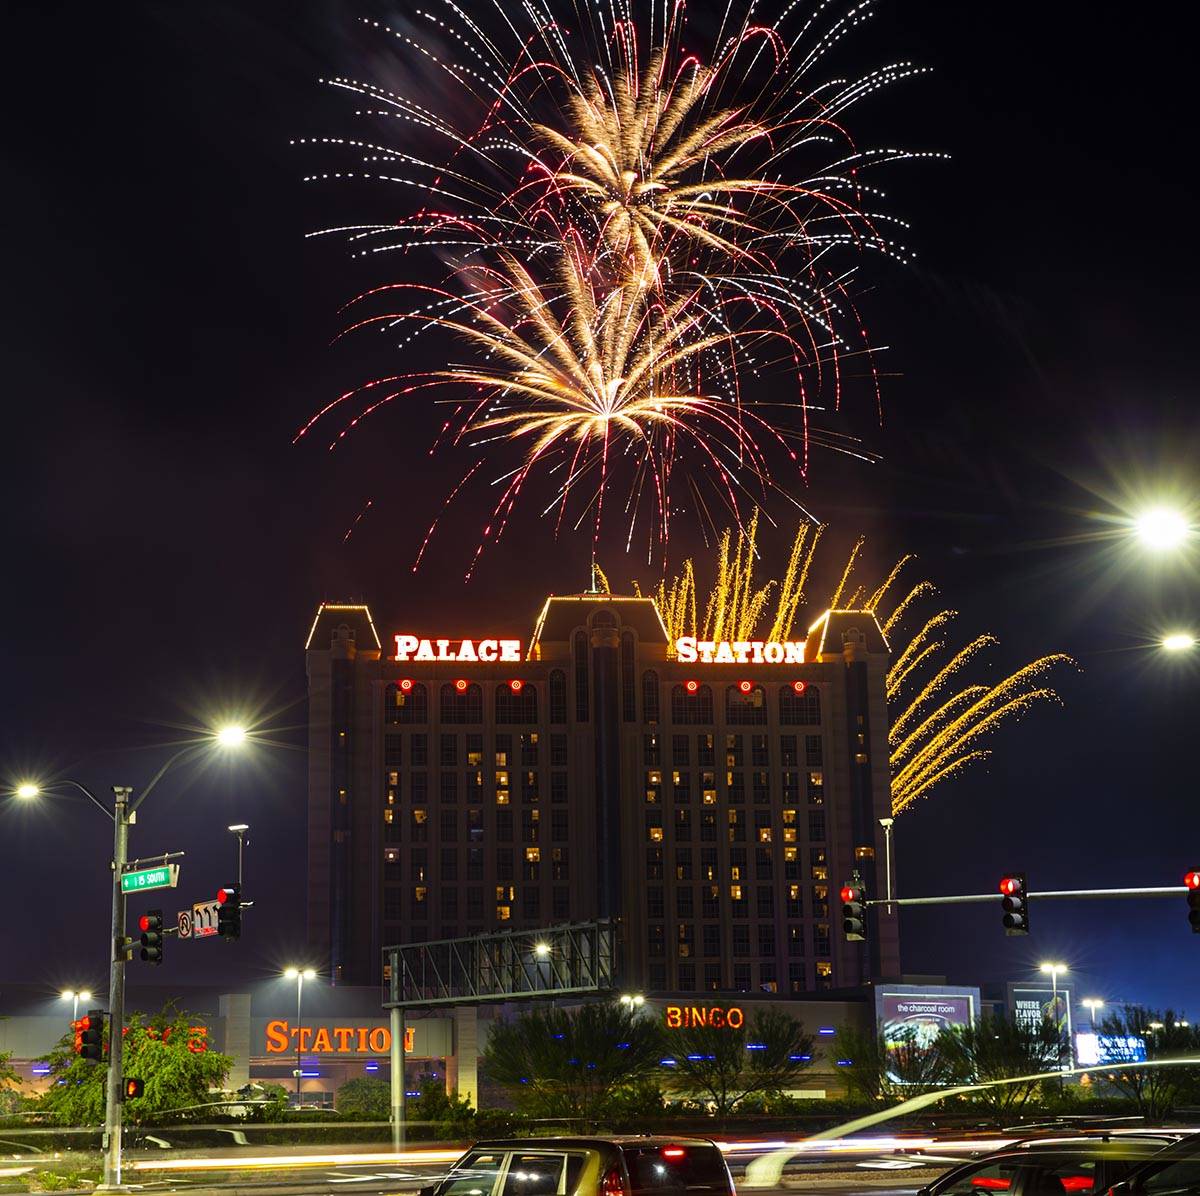 Fireworks go off in celebration of the 45th anniversary of Palace Station and Station Casinos i ...